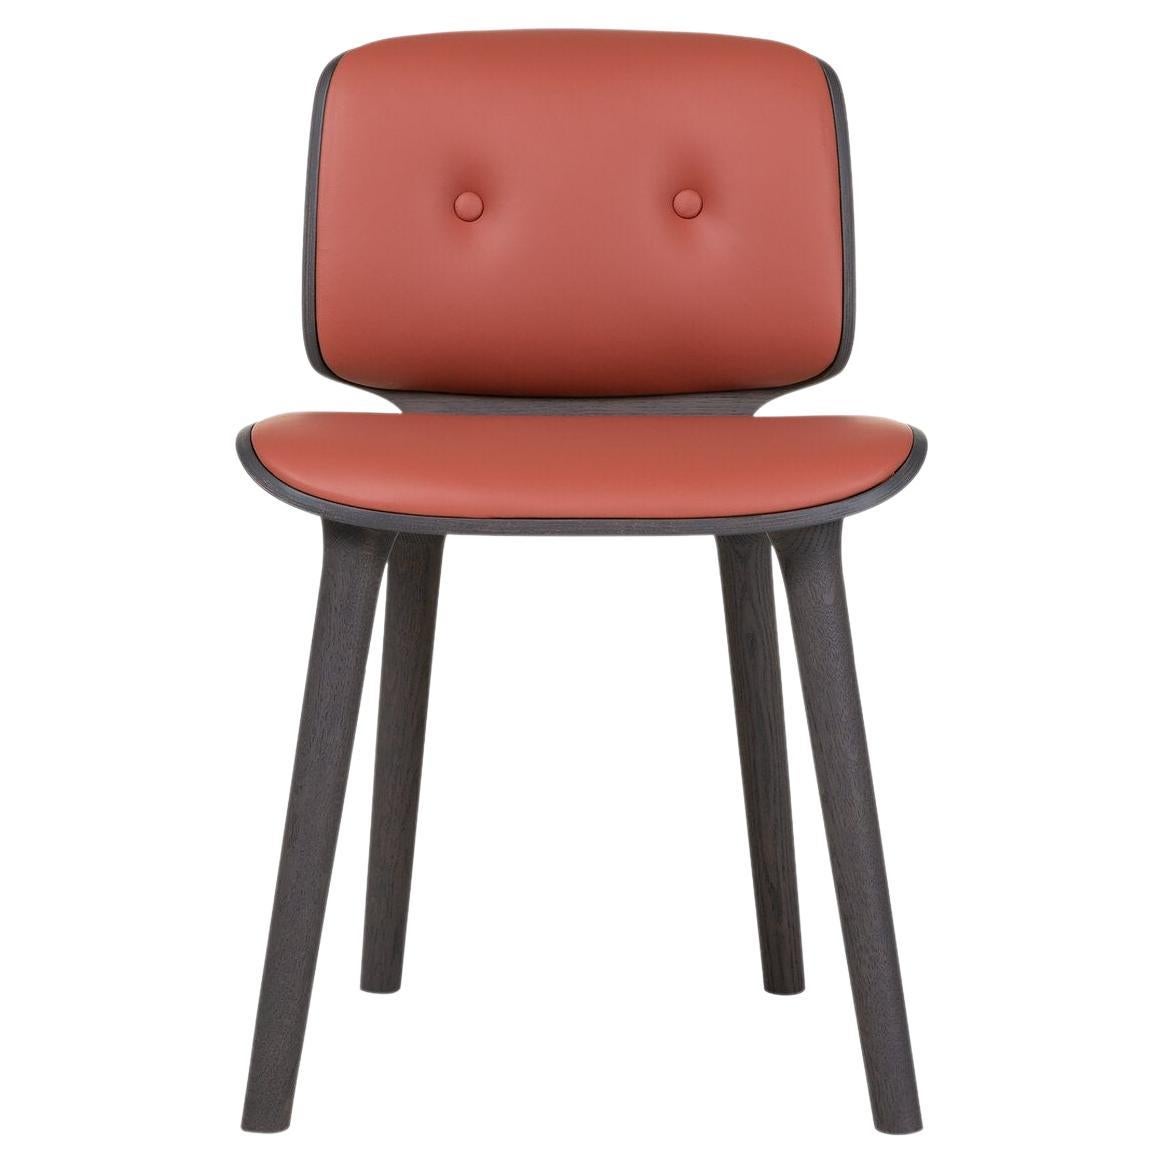 Moooi Nut Dining Chair in Grey Stained Oak & Spectrum Red Brown 30172 Upholstery For Sale